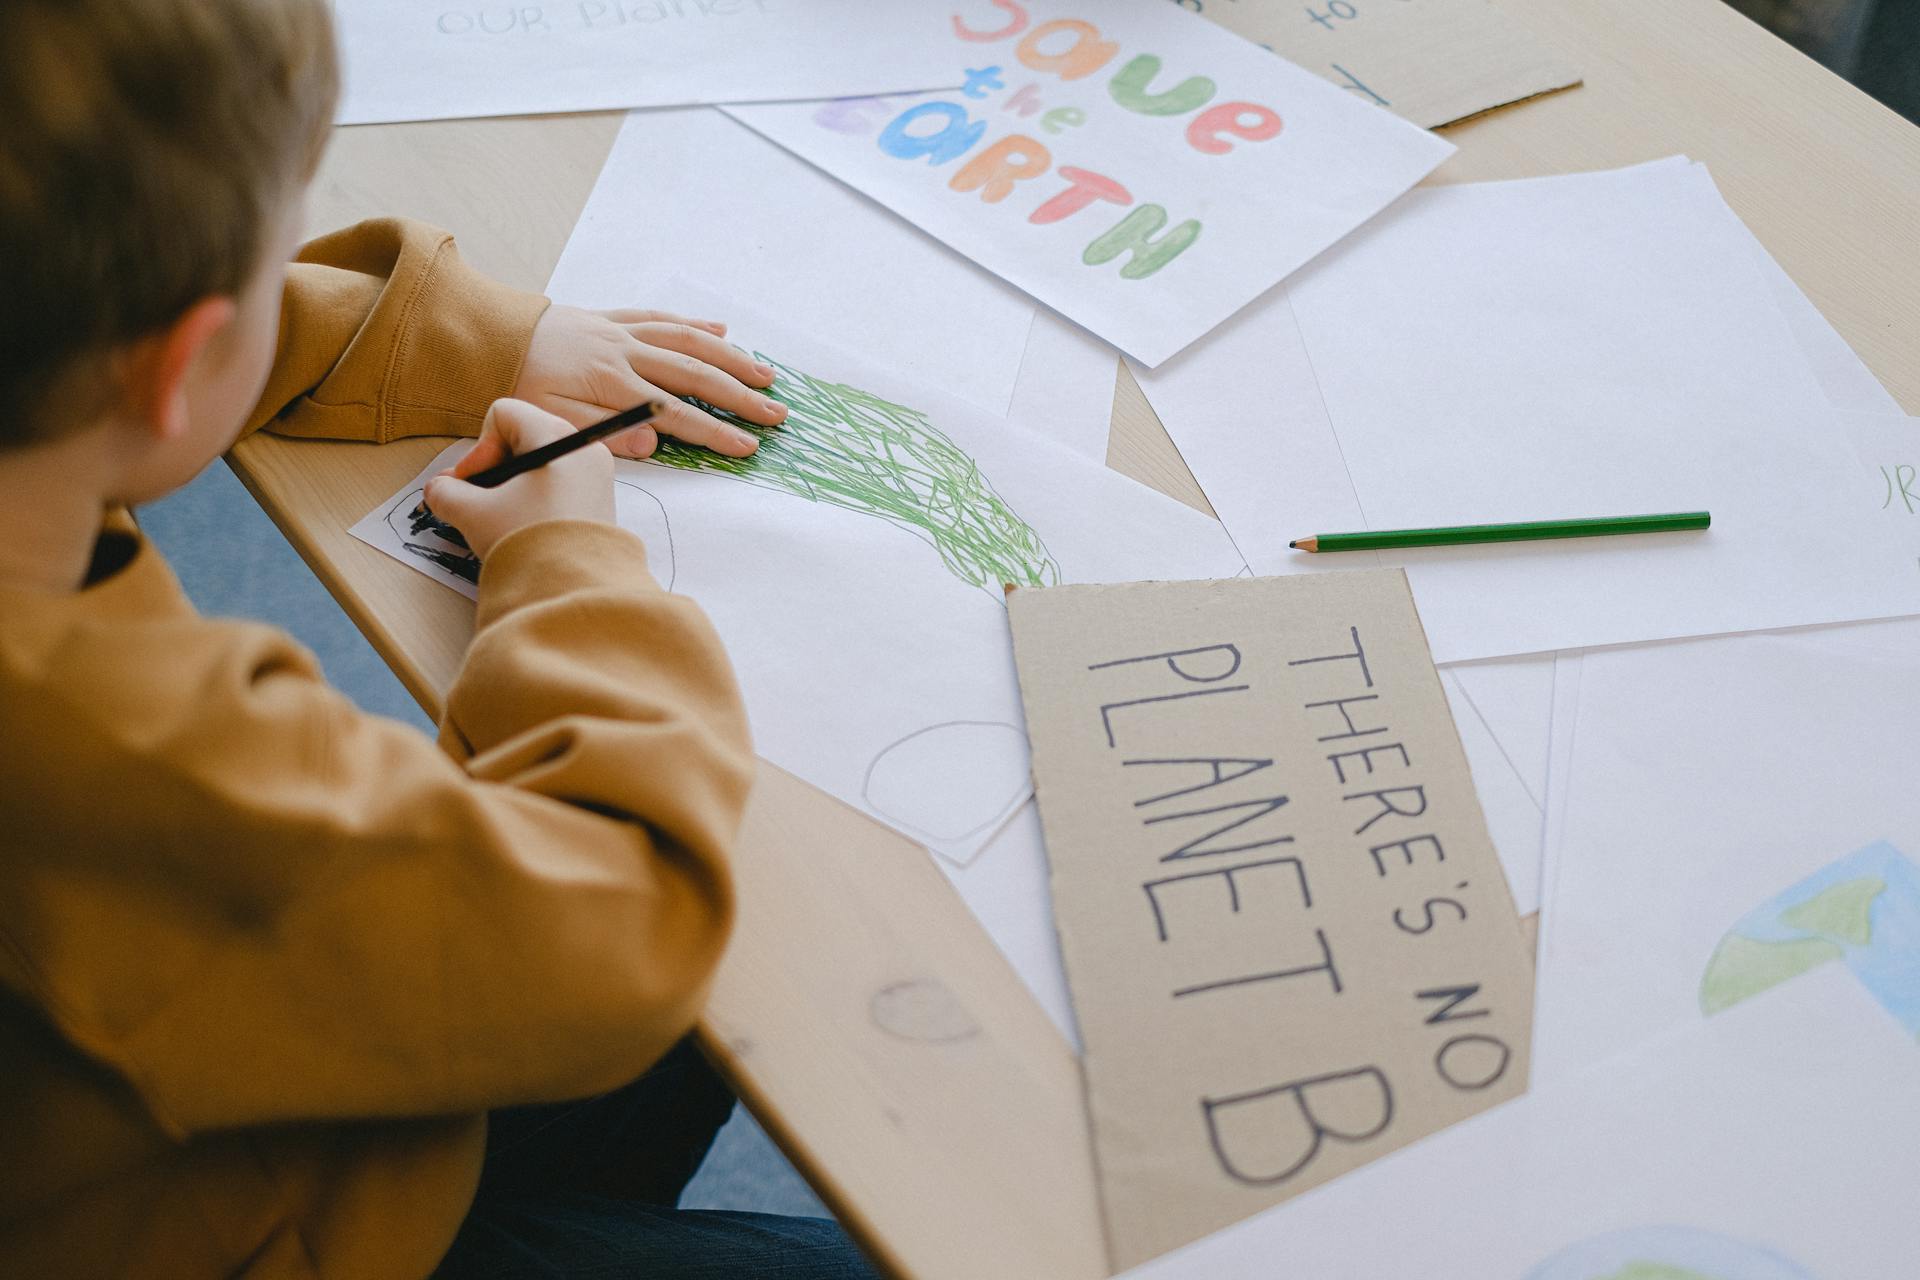 A little boy drawing at a desk | Source: Pexels